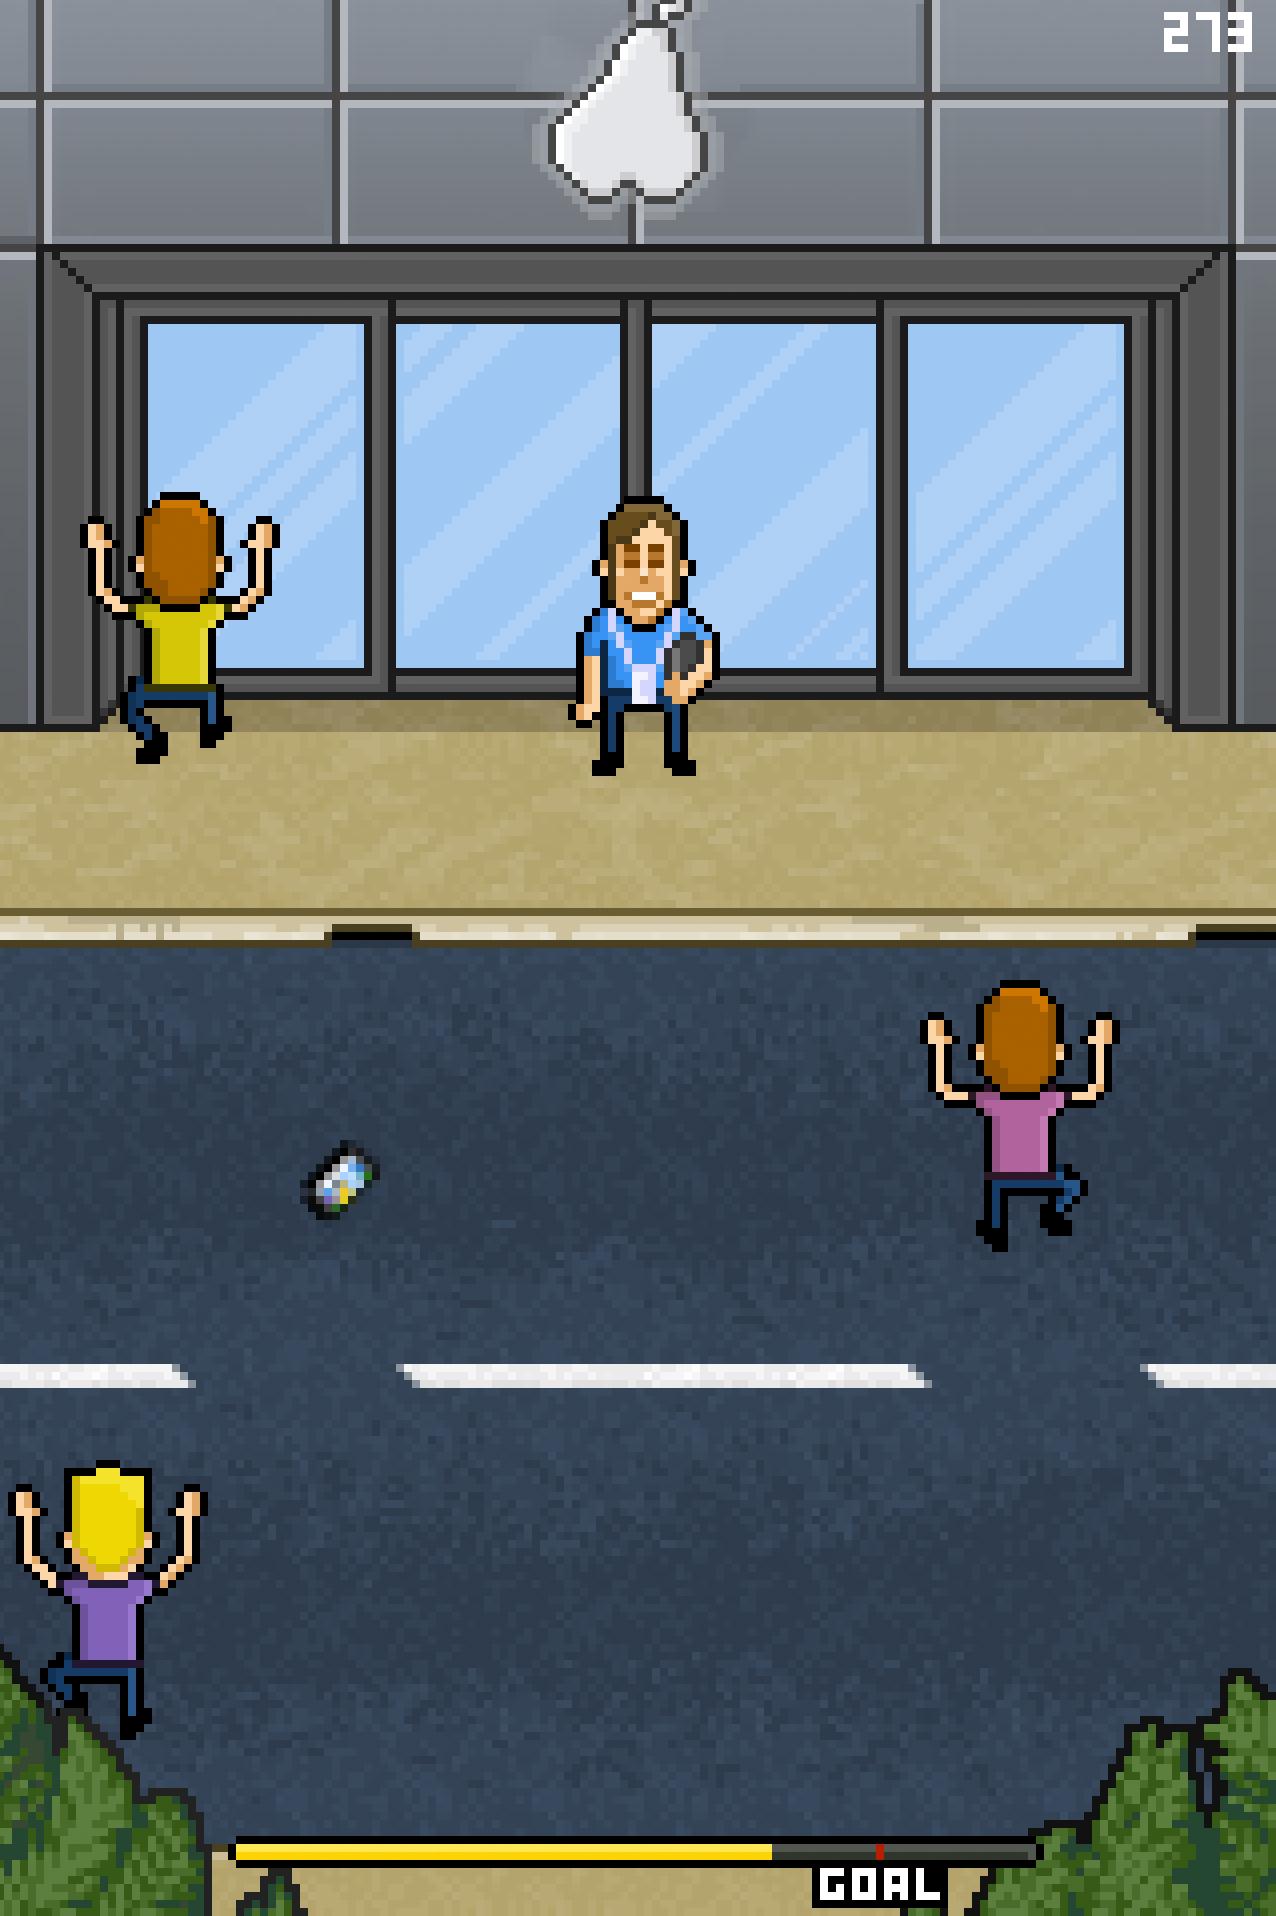 Screenshot taken from a Computergame: small figures in front of a phone shop